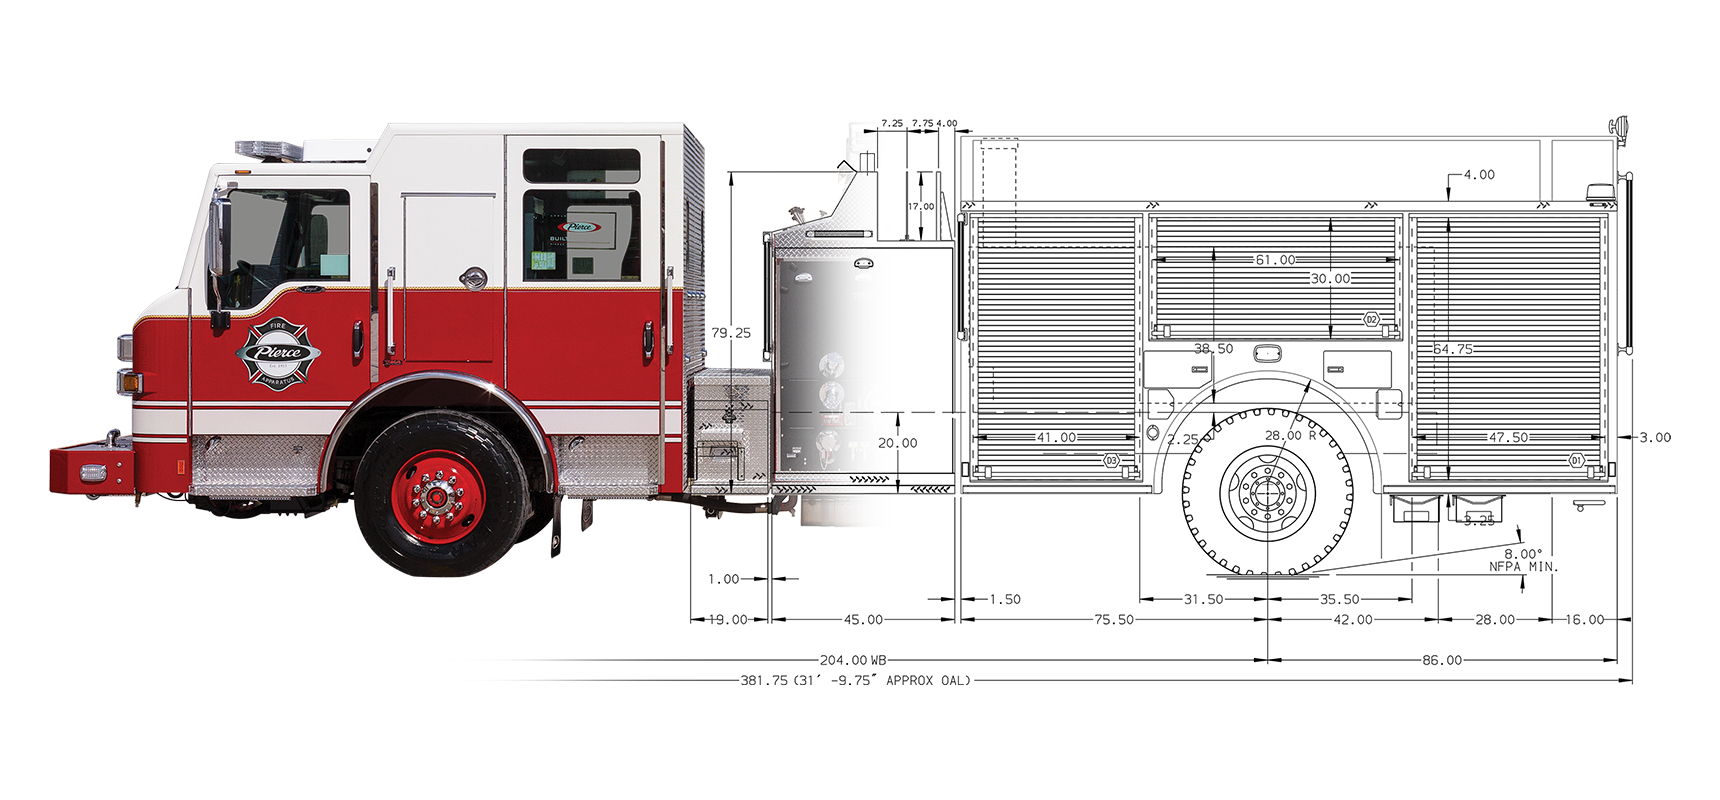 Build My Pierce (BMP) is a rapid configurator to simplify the fire apparatus design and ordering process.